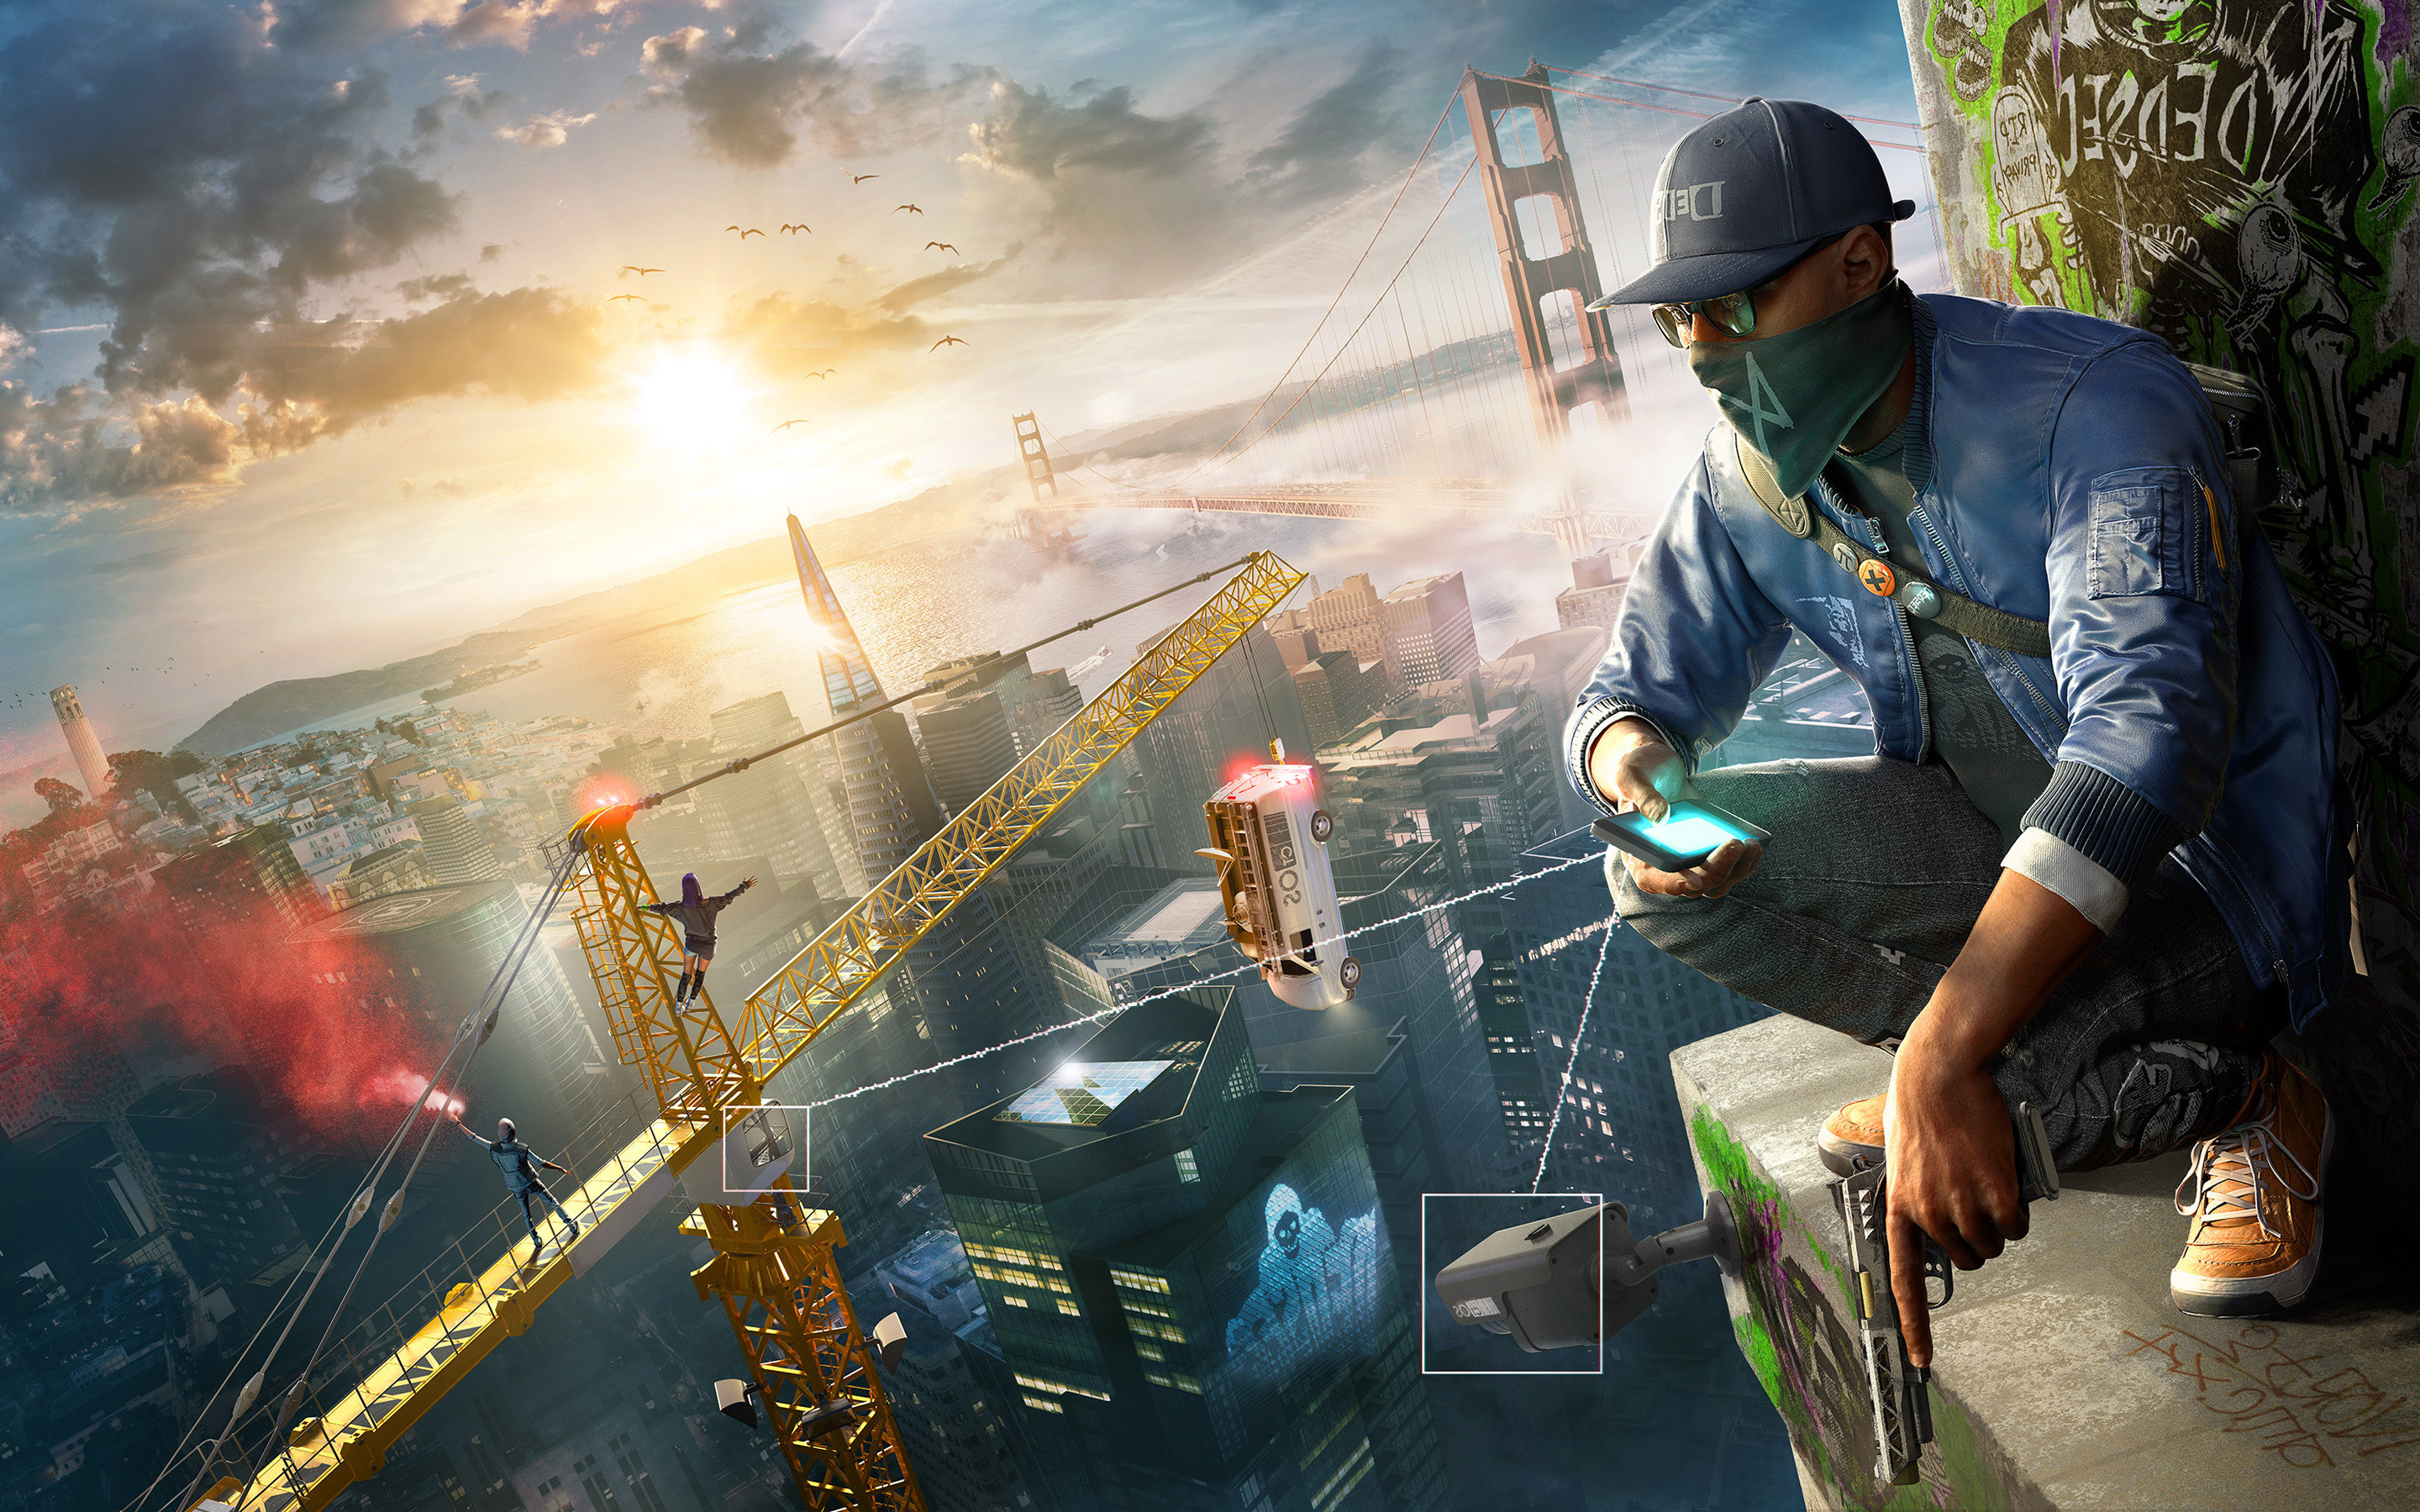 watch dogs 2 wallpaper,action adventure game,pc game,strategy video game,games,video game software